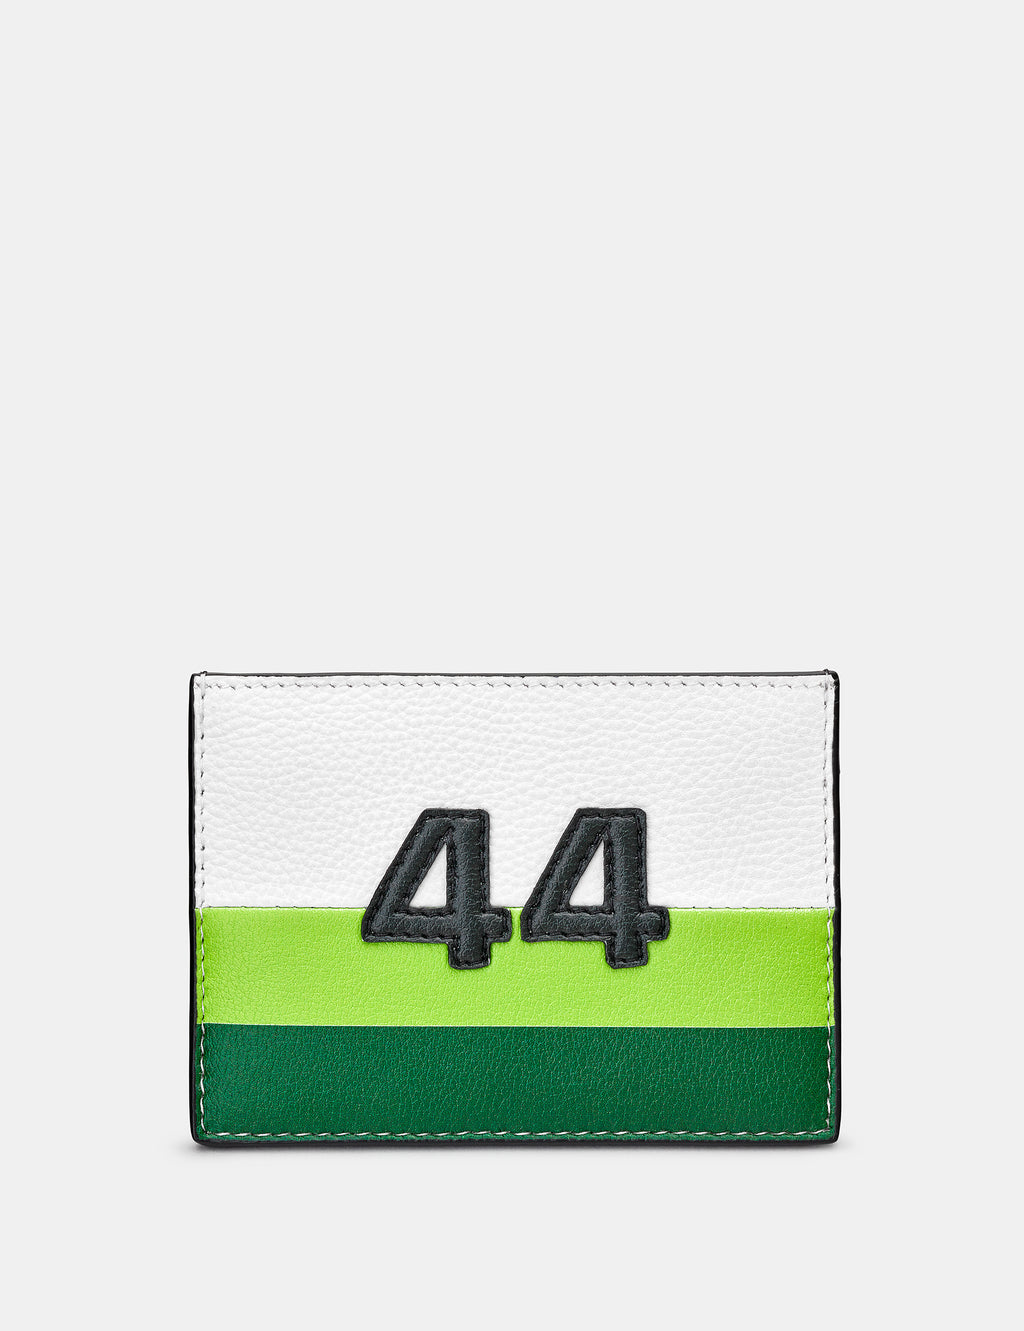 Car Livery No. 44 White and Black Leather Card Holder